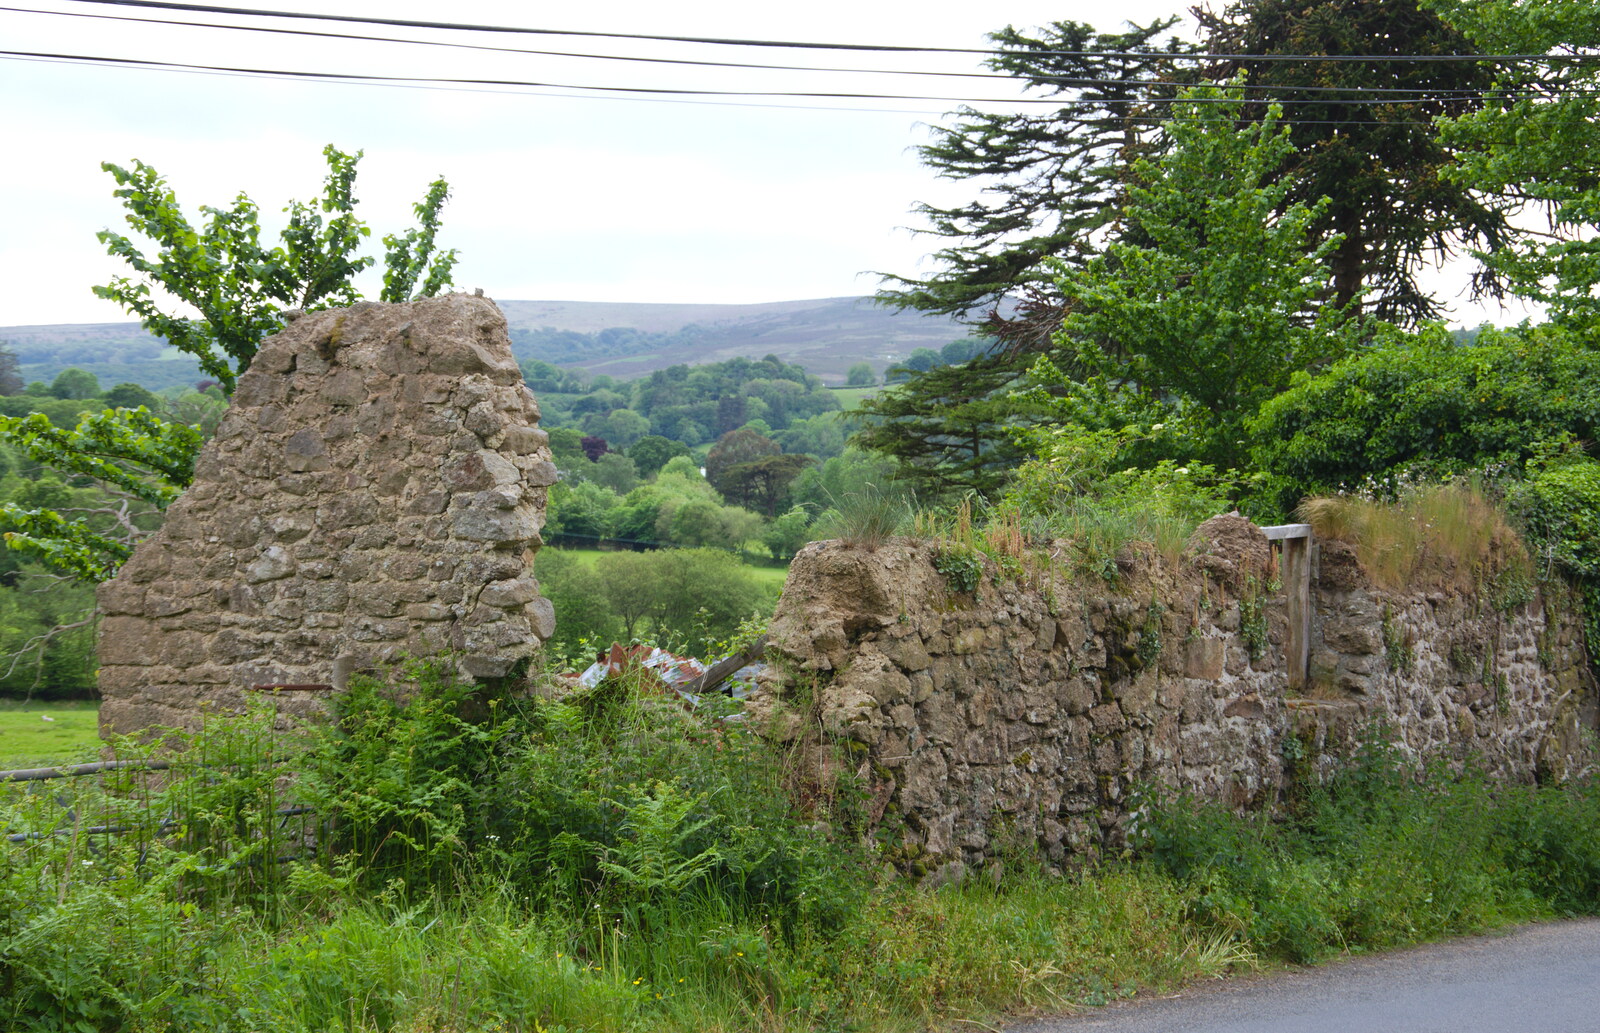 A derelict cottage on the way from Bovey from The Tom Cobley and a Return to Haytor, Bovey Tracey, Devon - 27th May 2019